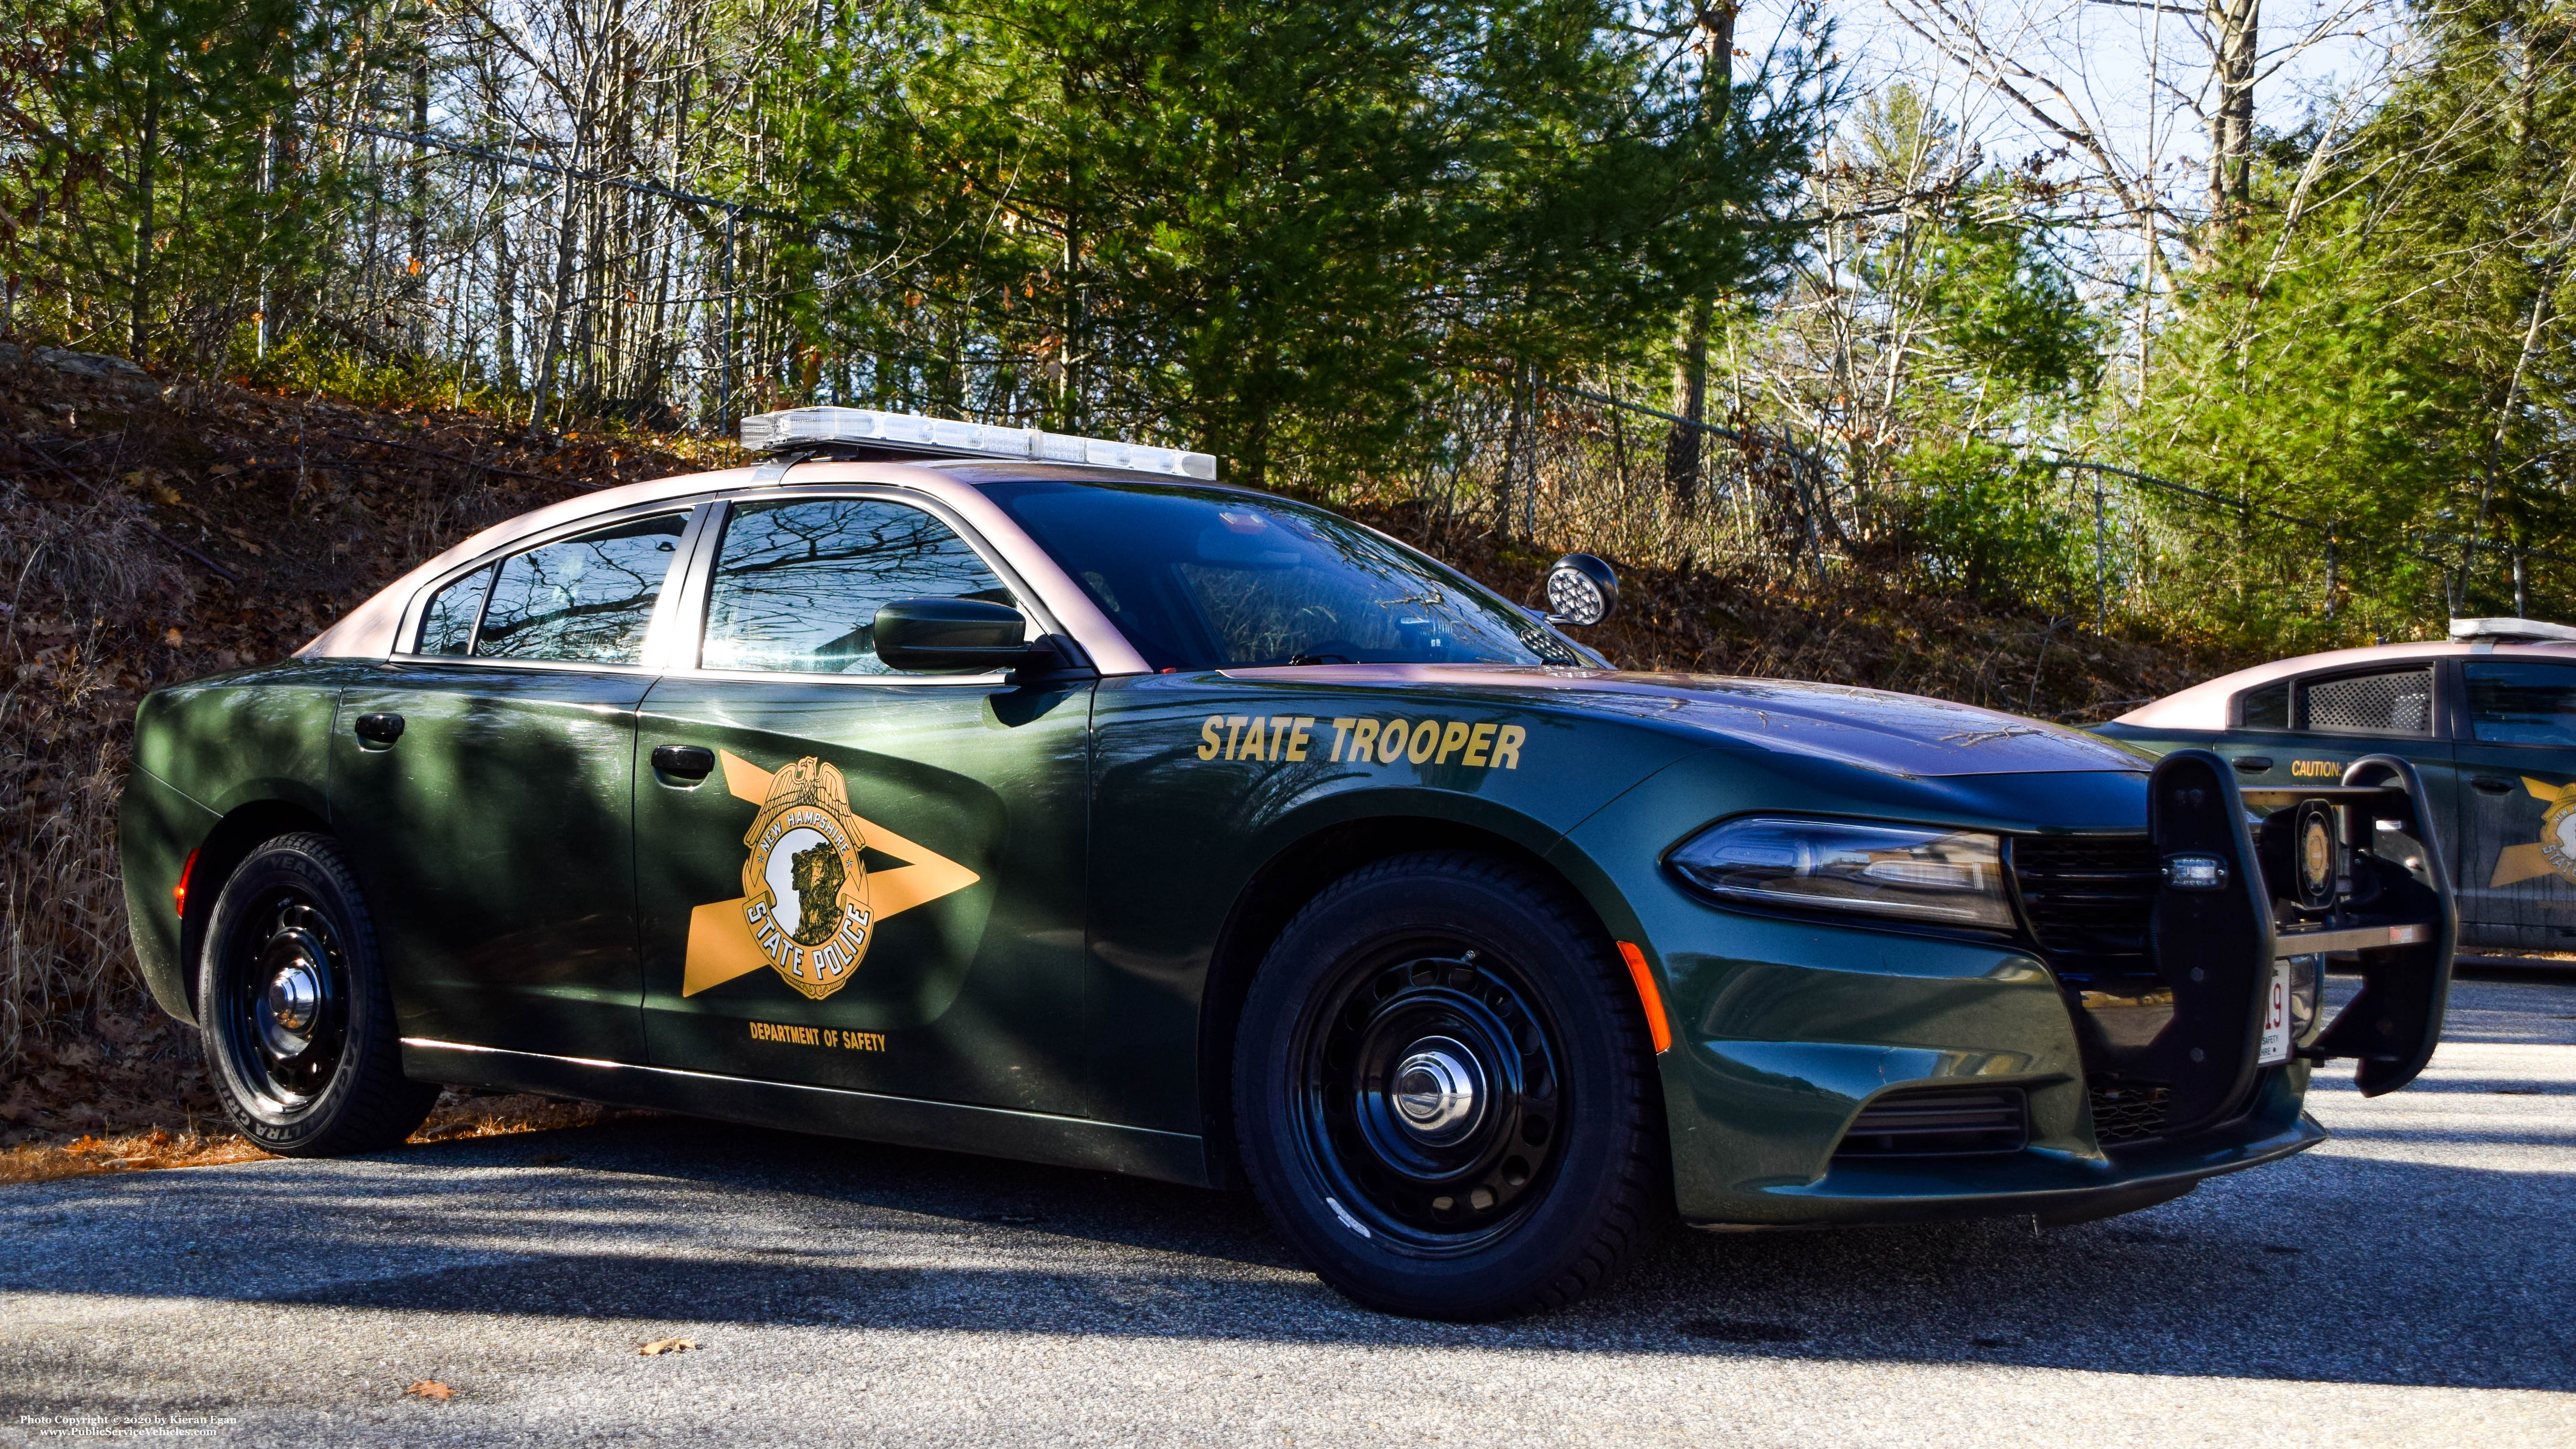 A photo  of New Hampshire State Police
            Cruiser 419, a 2015-2019 Dodge Charger             taken by Kieran Egan